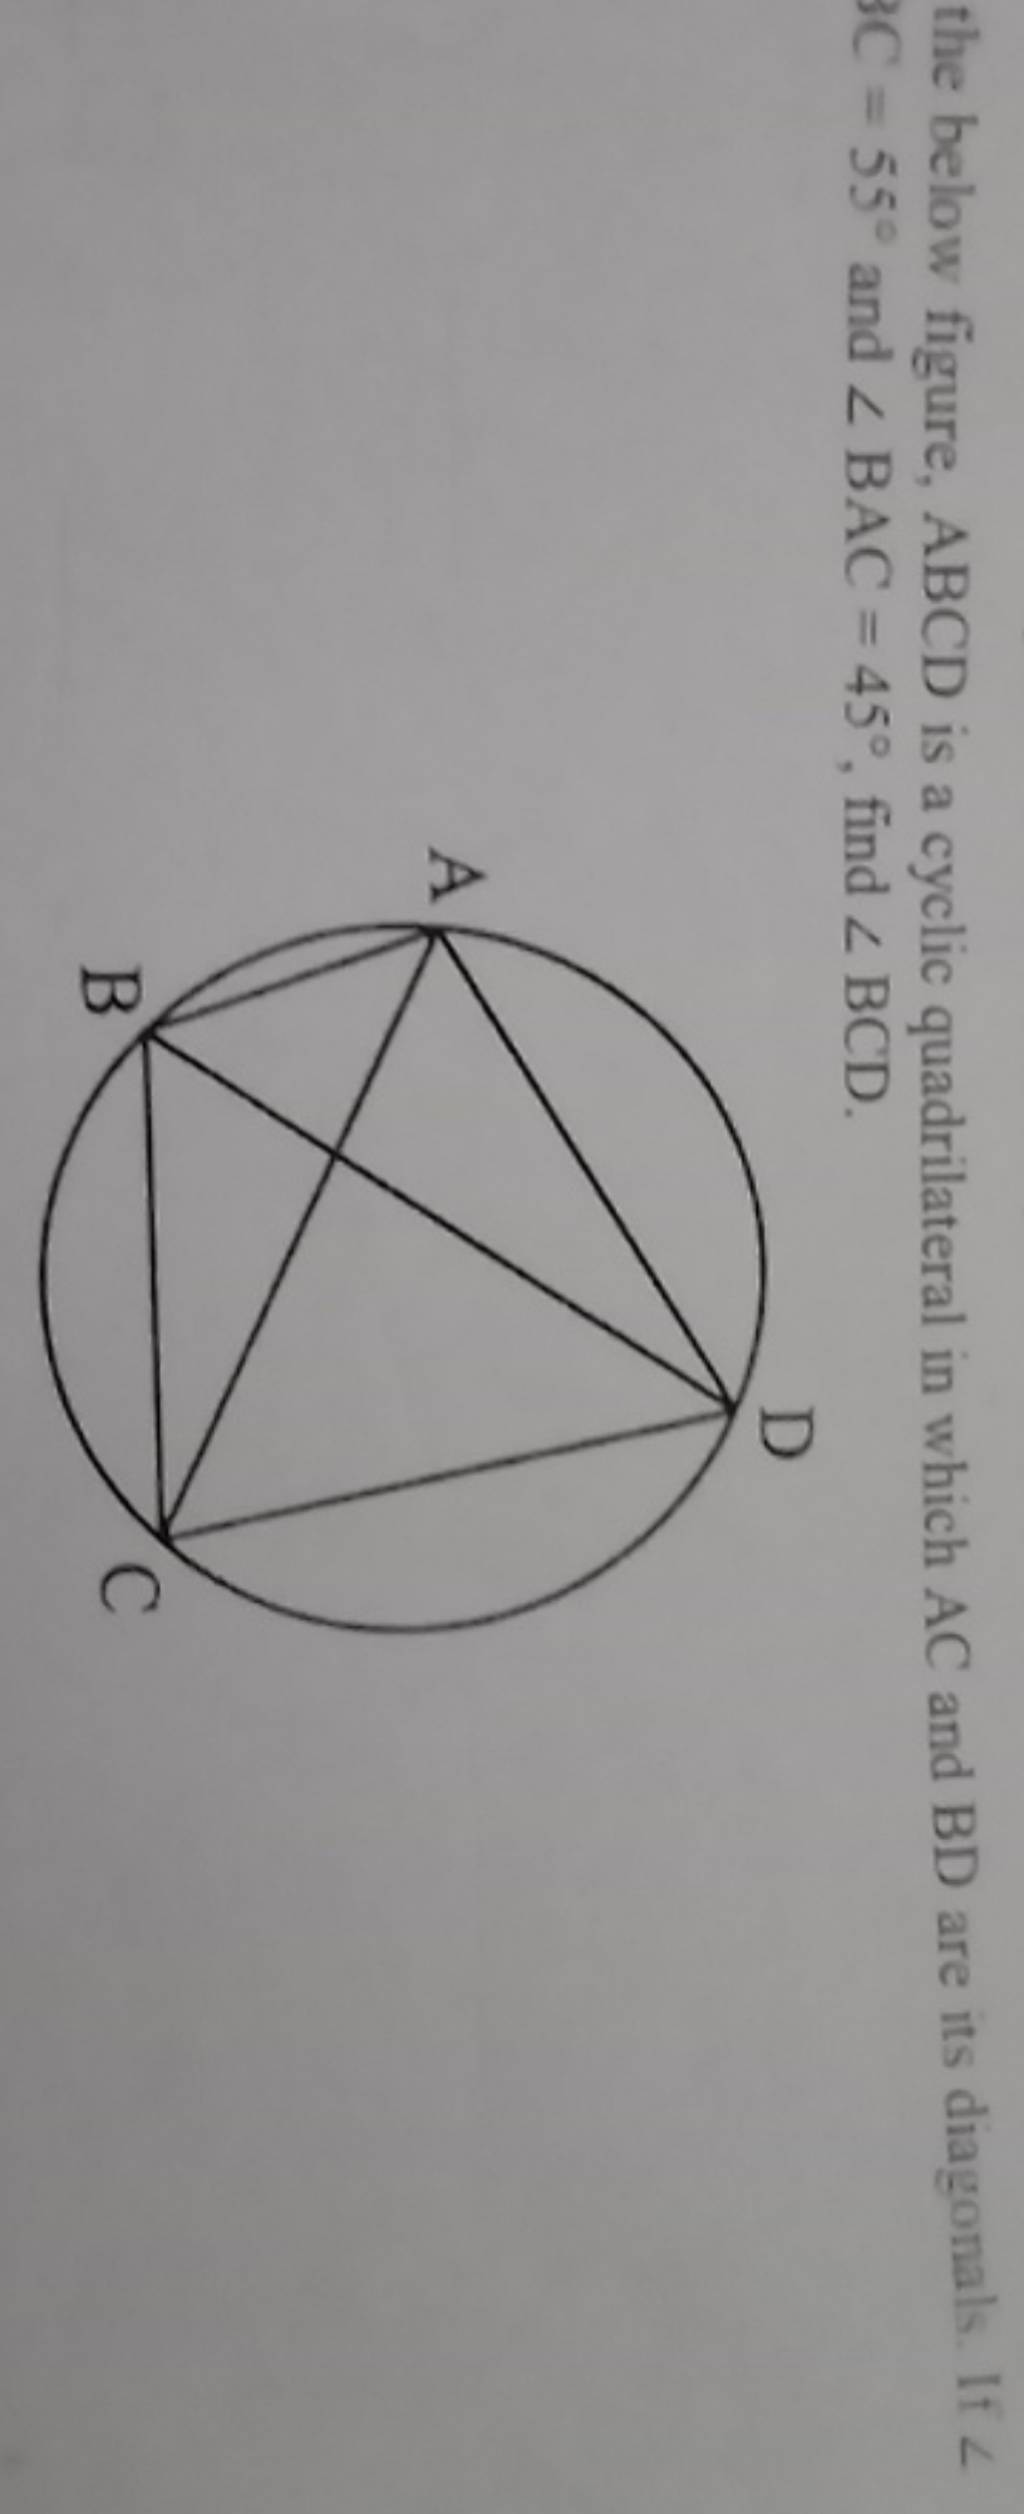 The Below Figure Abcd Is A Cyclic Quadrilateral In Which Ac And Bd Are I 8009